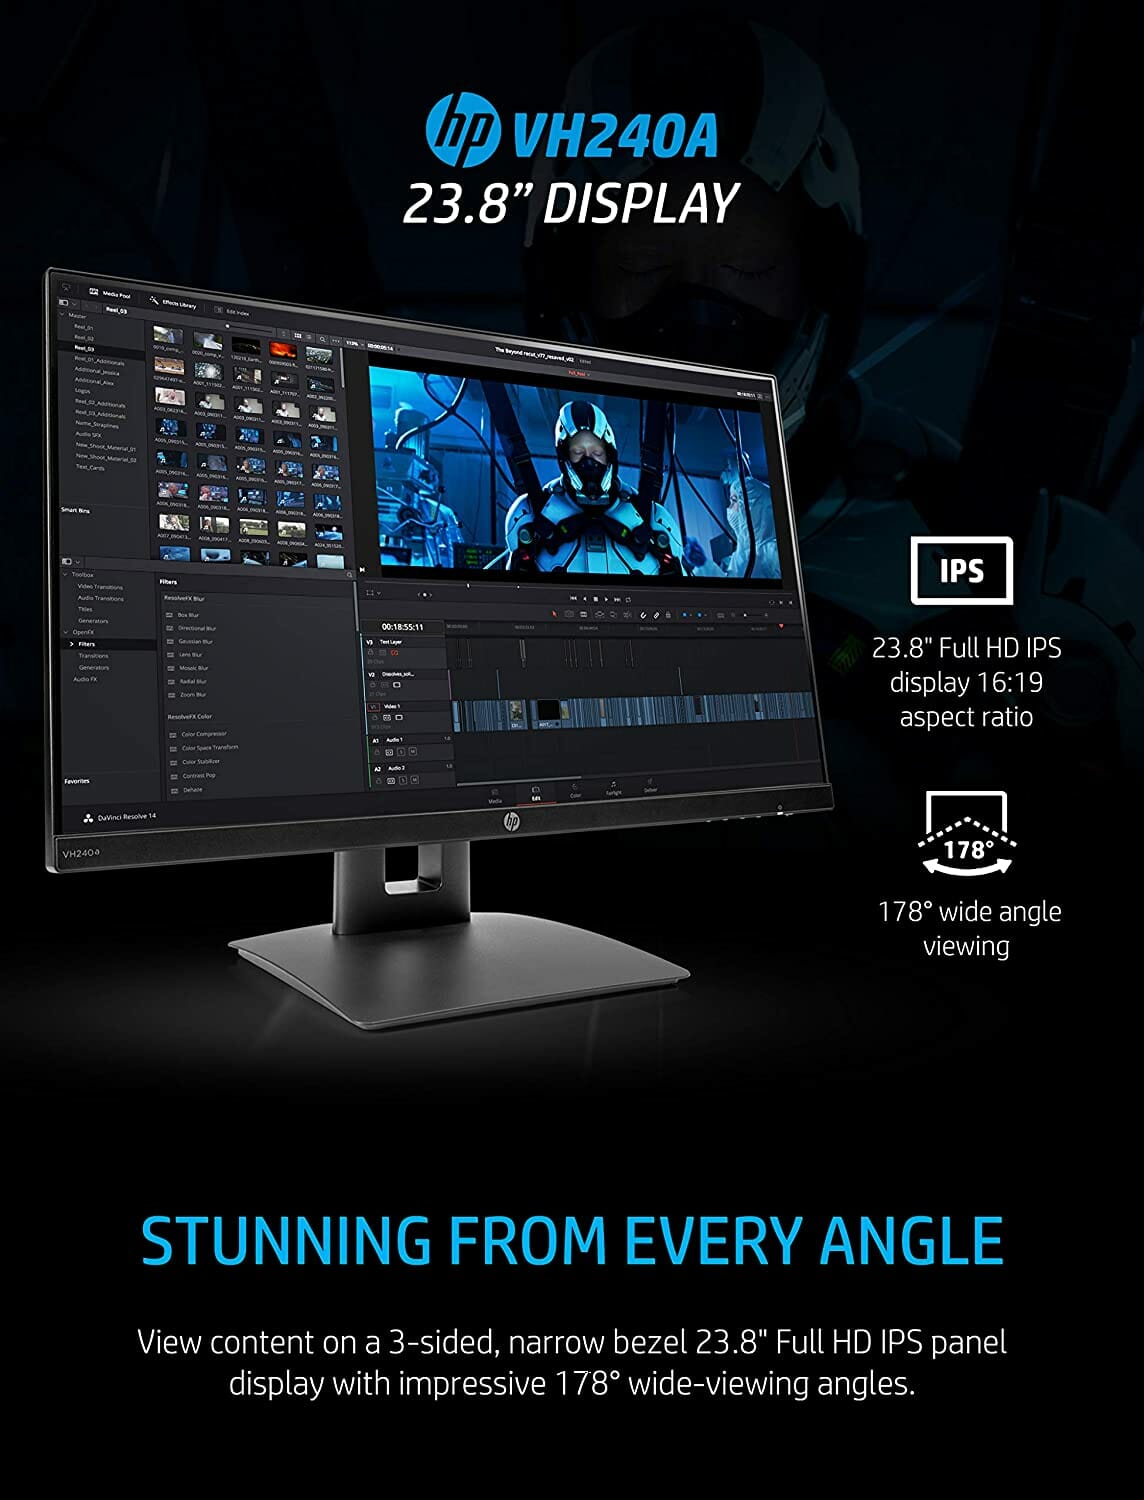 HP VH240a monitor stunning from every angle